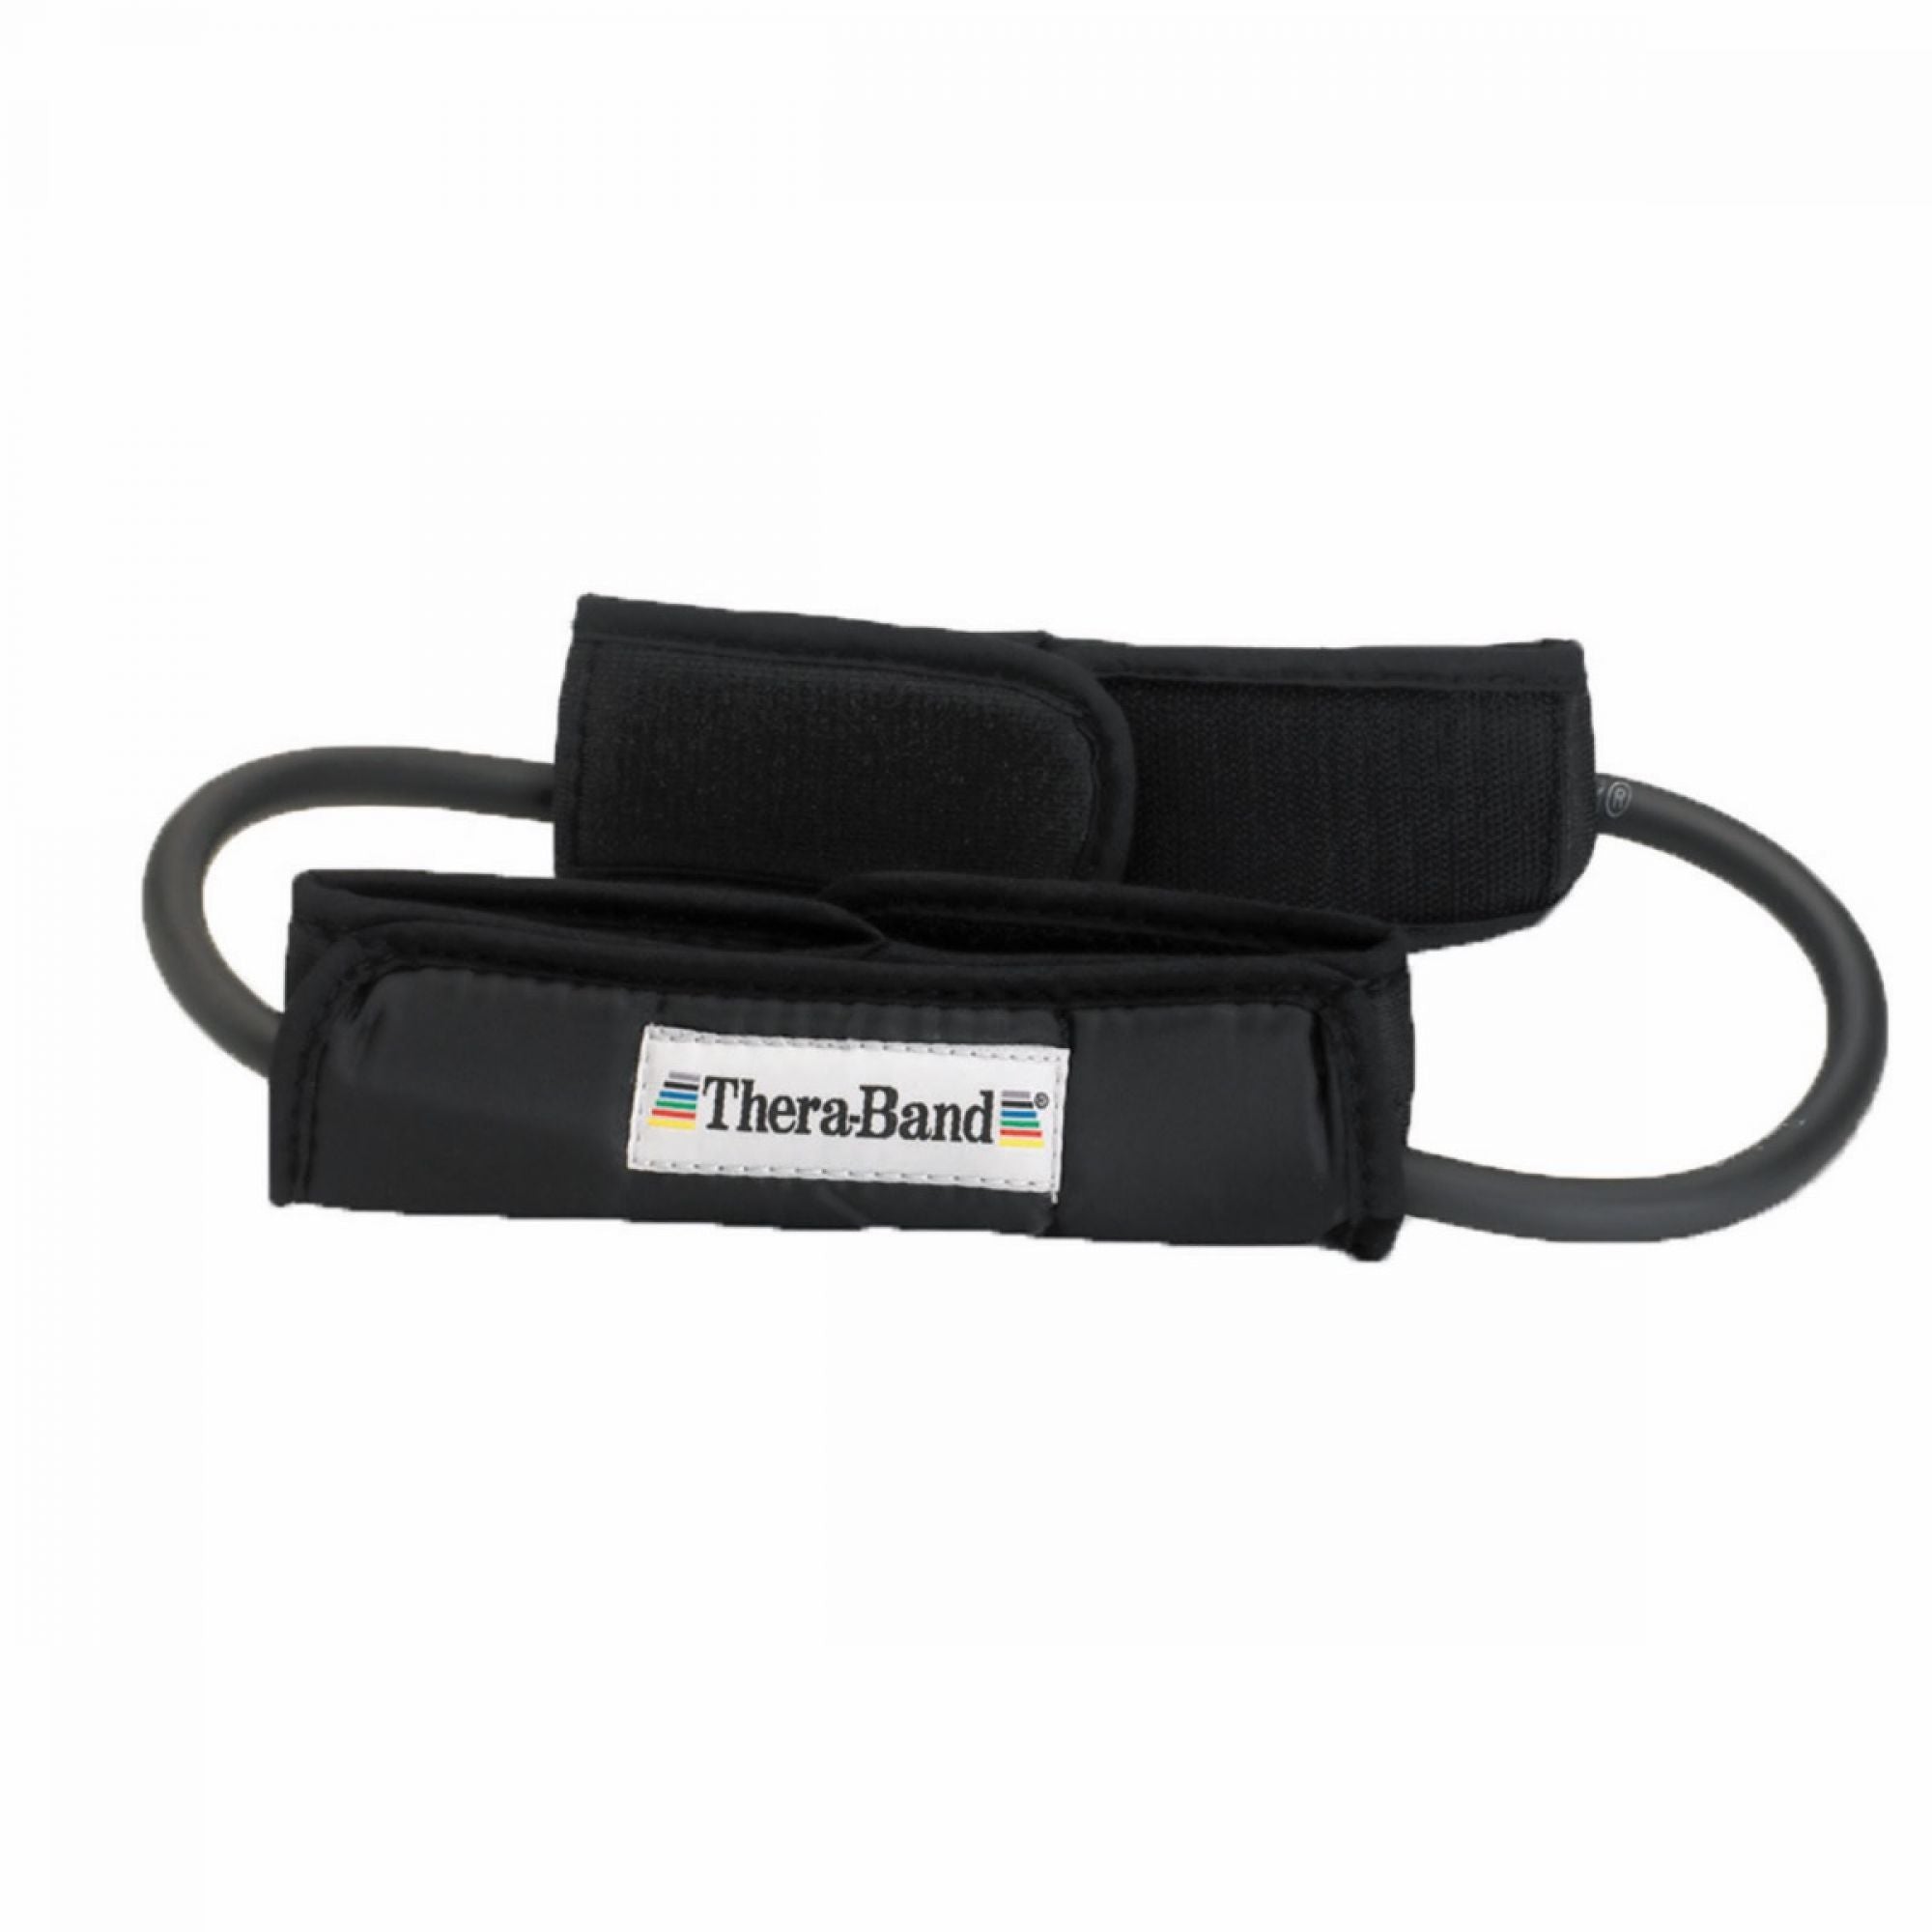 TheraBand Professional Resistance Tubing Loop with Padded Cuffs